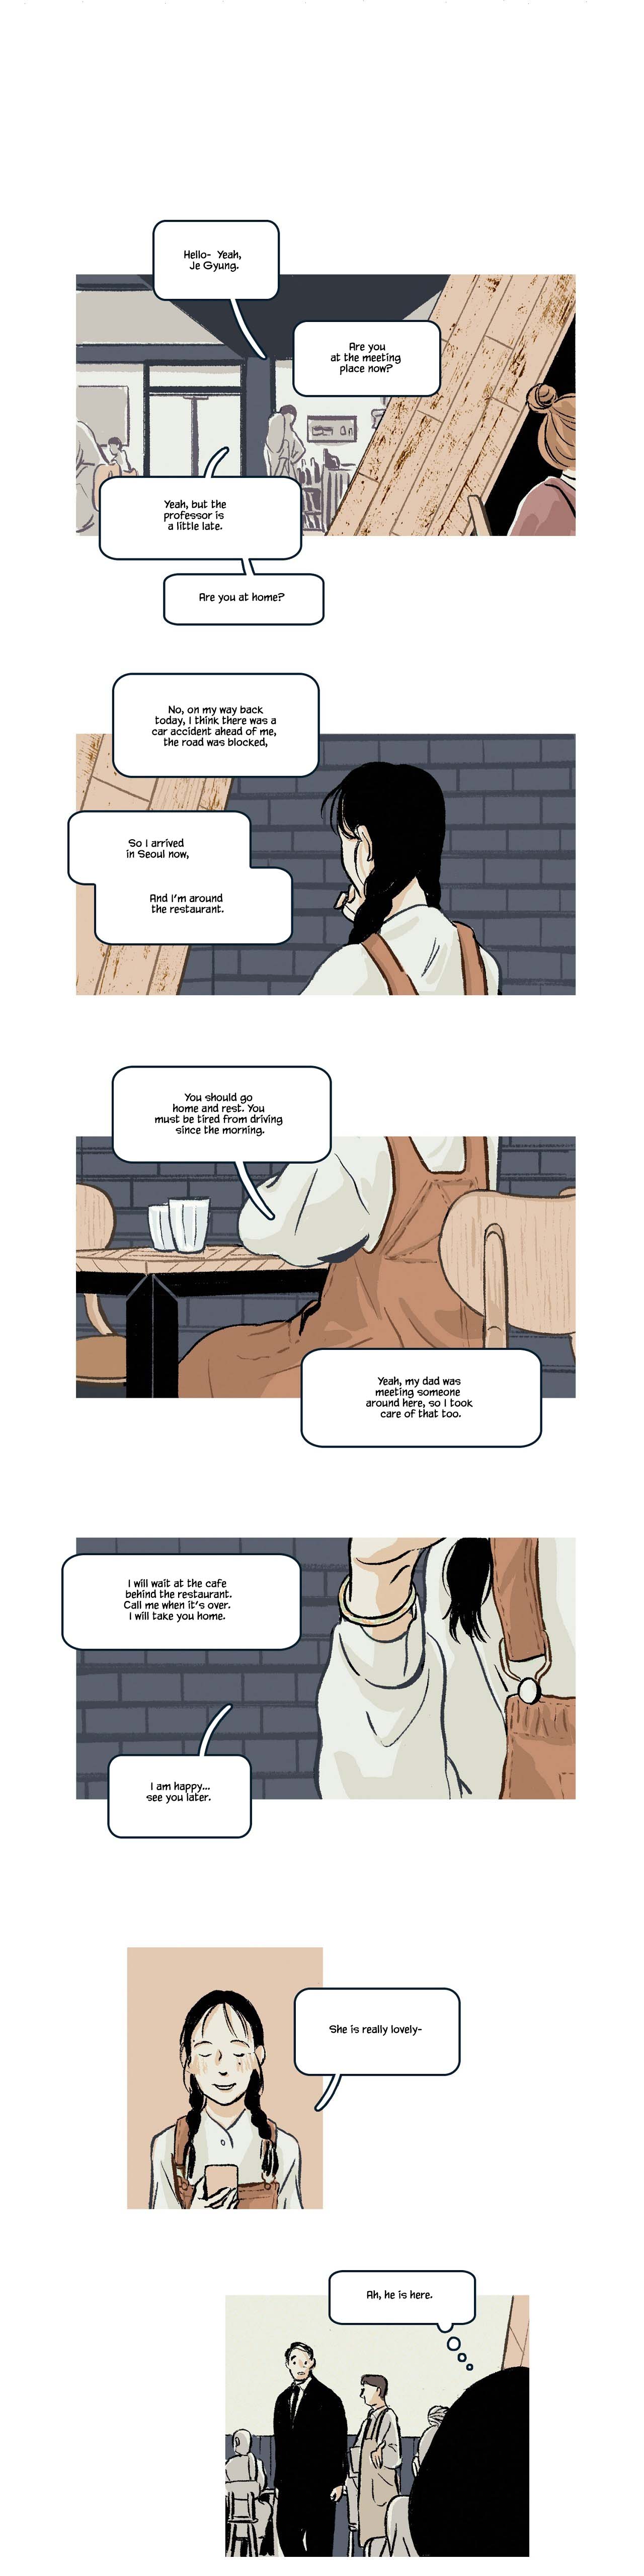 The Professor Who Reads Love Stories - Page 1